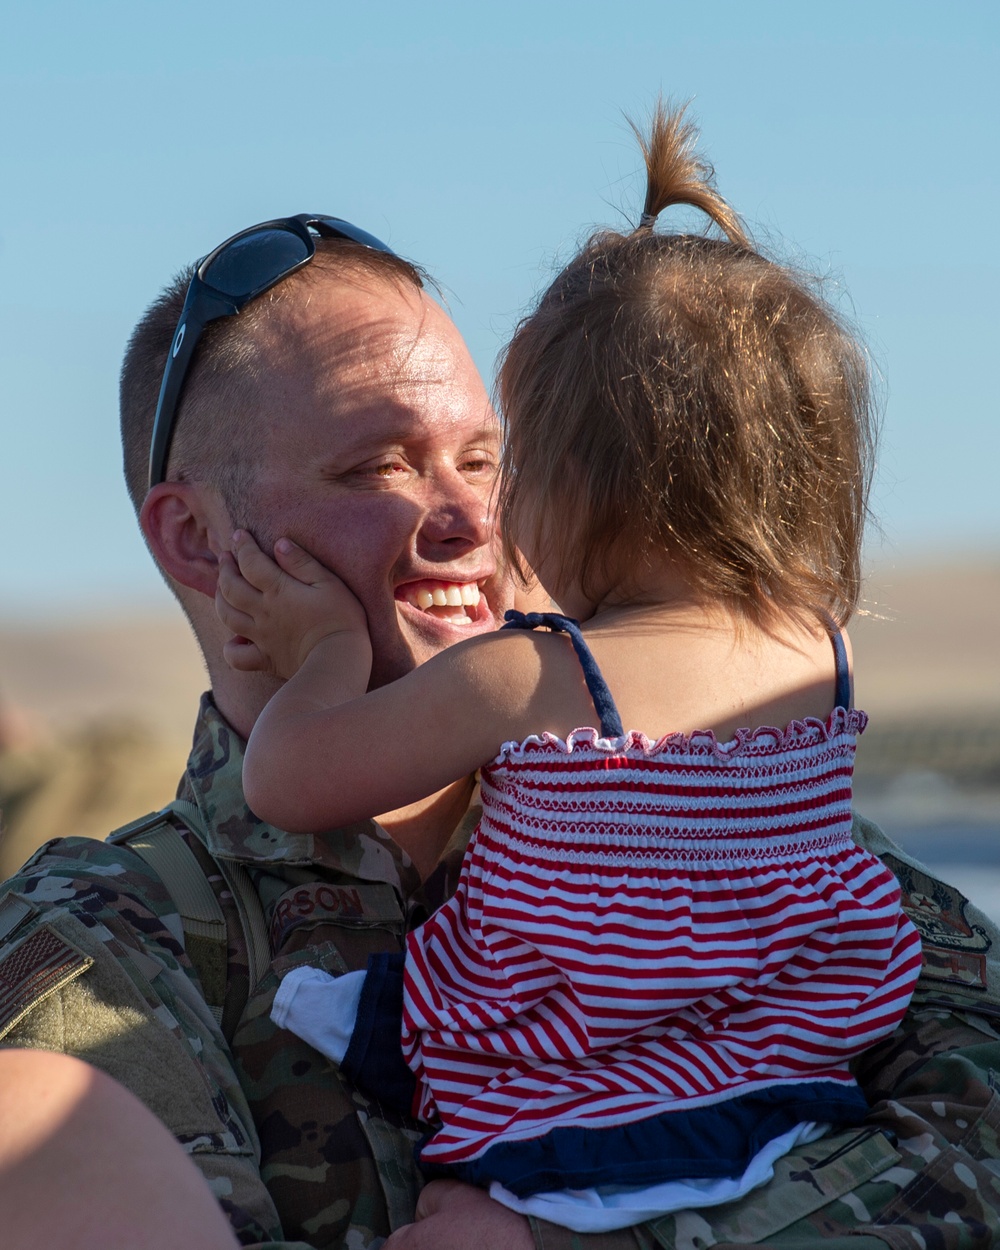 124th Fighter Wing Airmen Return Home From Deployment